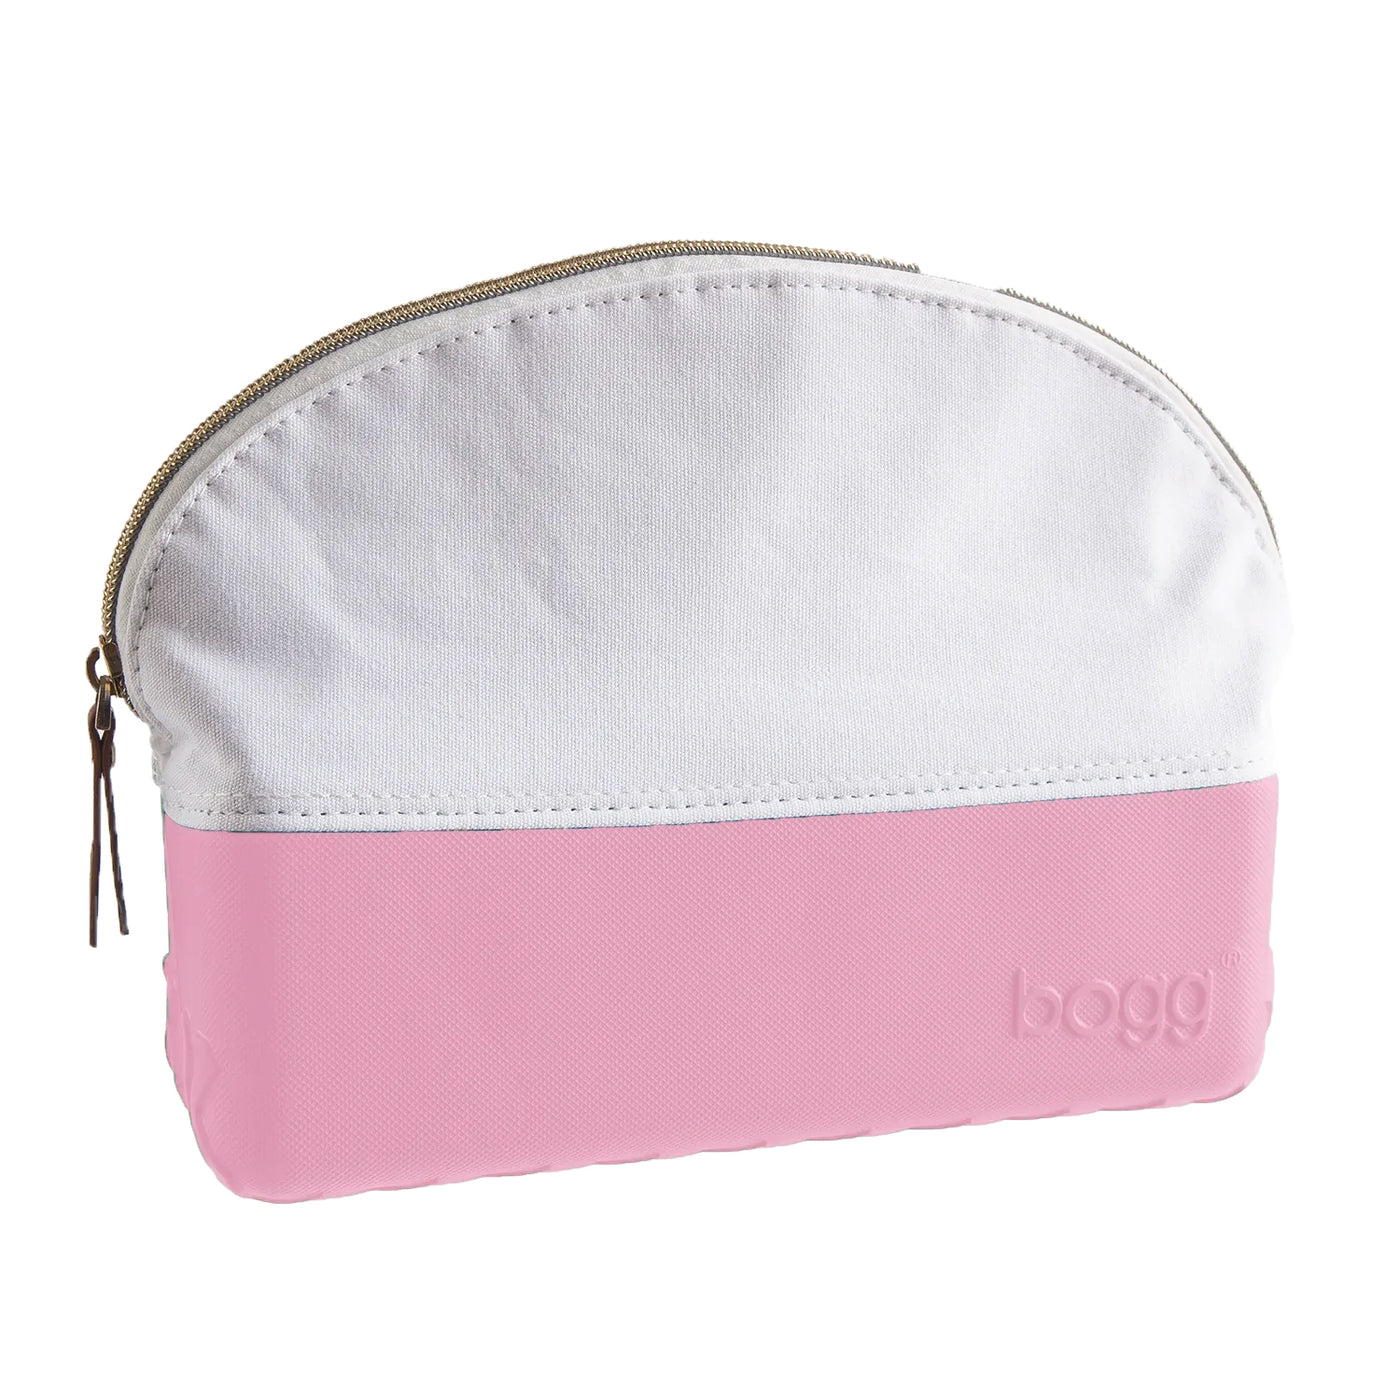 Bogg Beauty Bag - Blowing Pink Bubbles